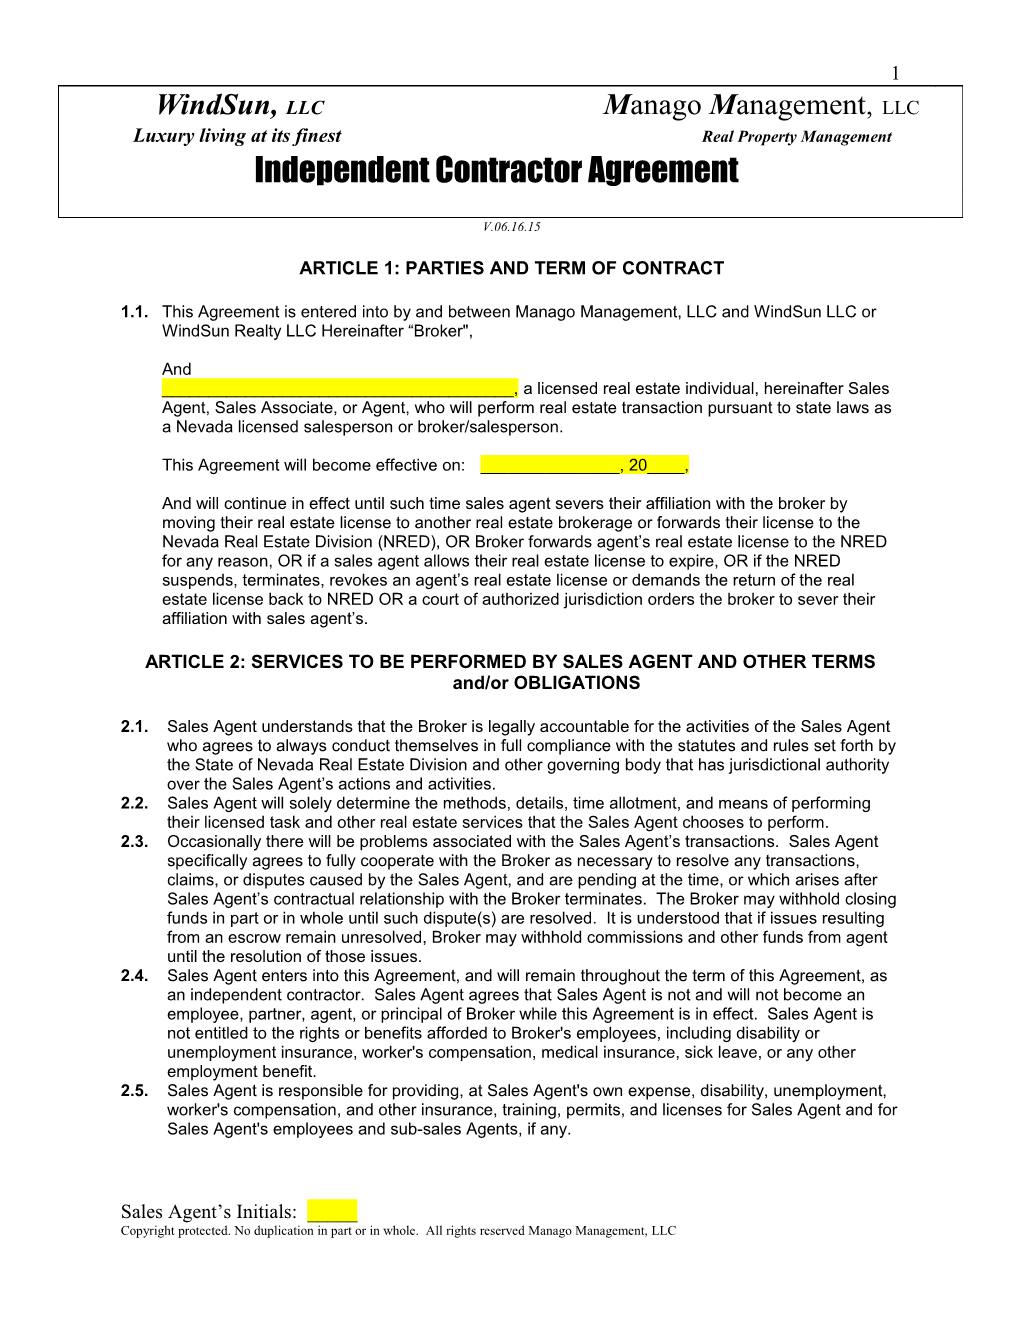 Independant Contractor Agreement